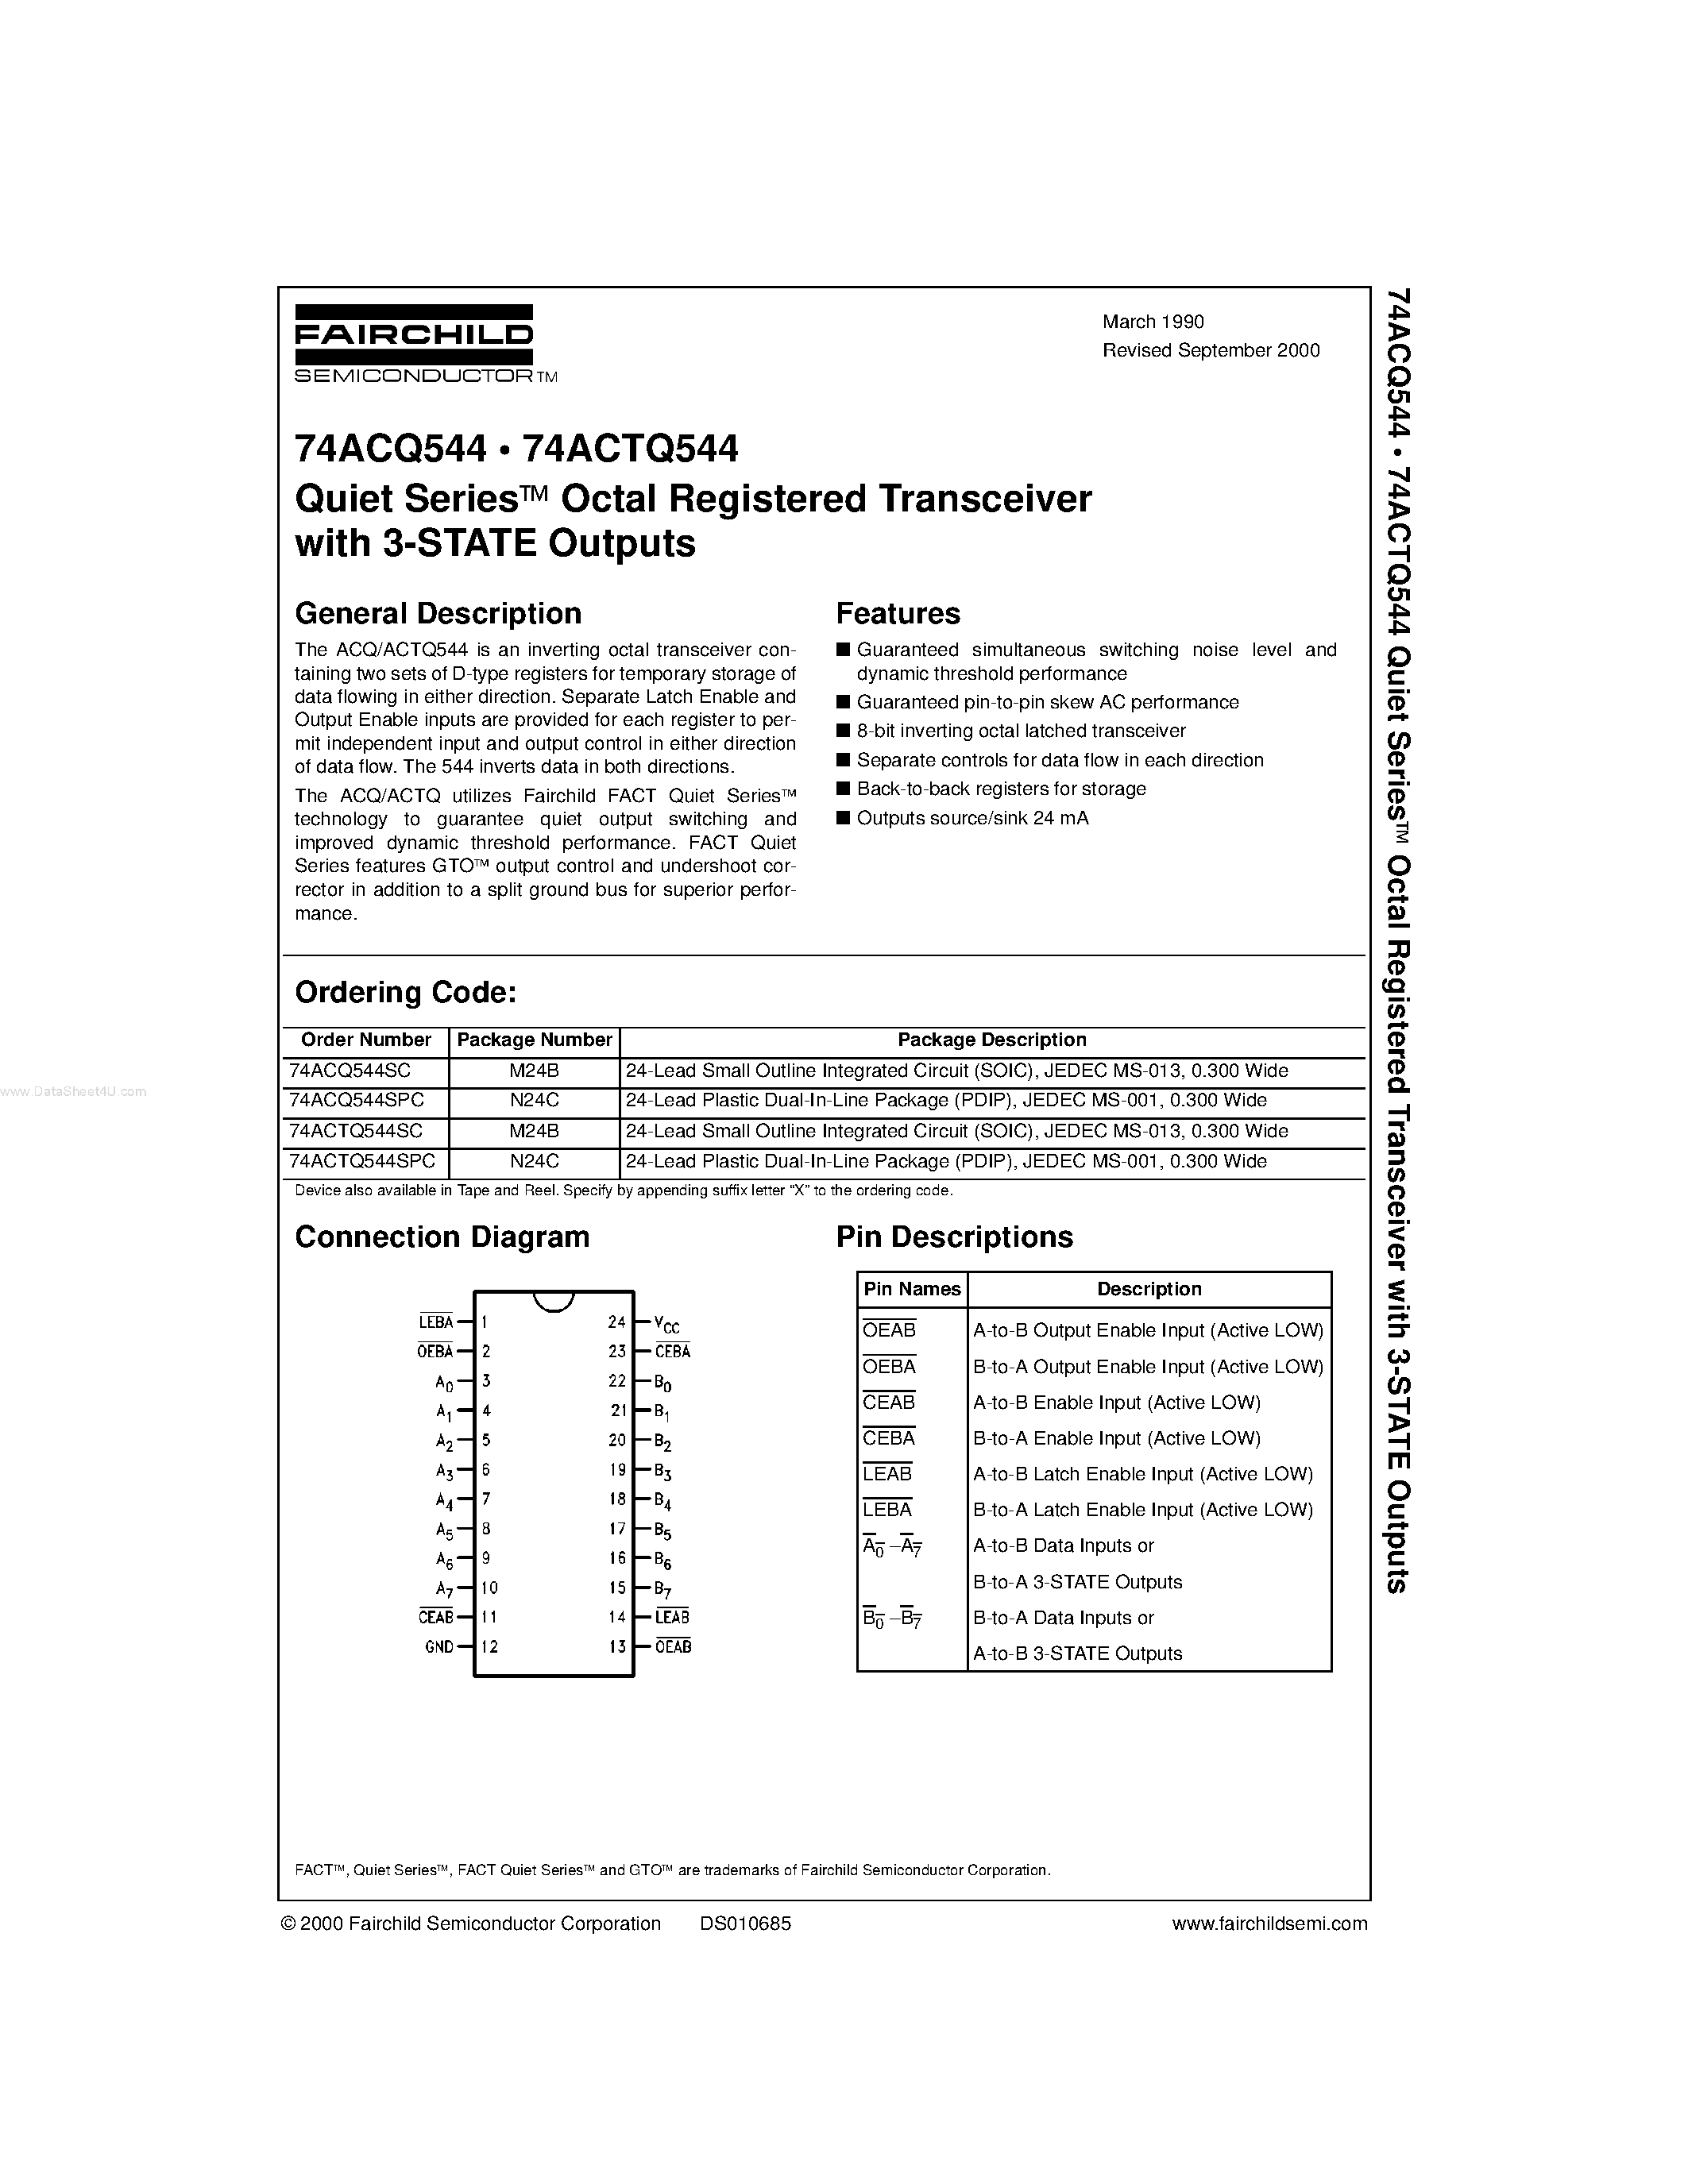 Datasheet 74ACQ544 - Quiet Series Octal Registered Transceiver with 3-STATE Outputs page 1